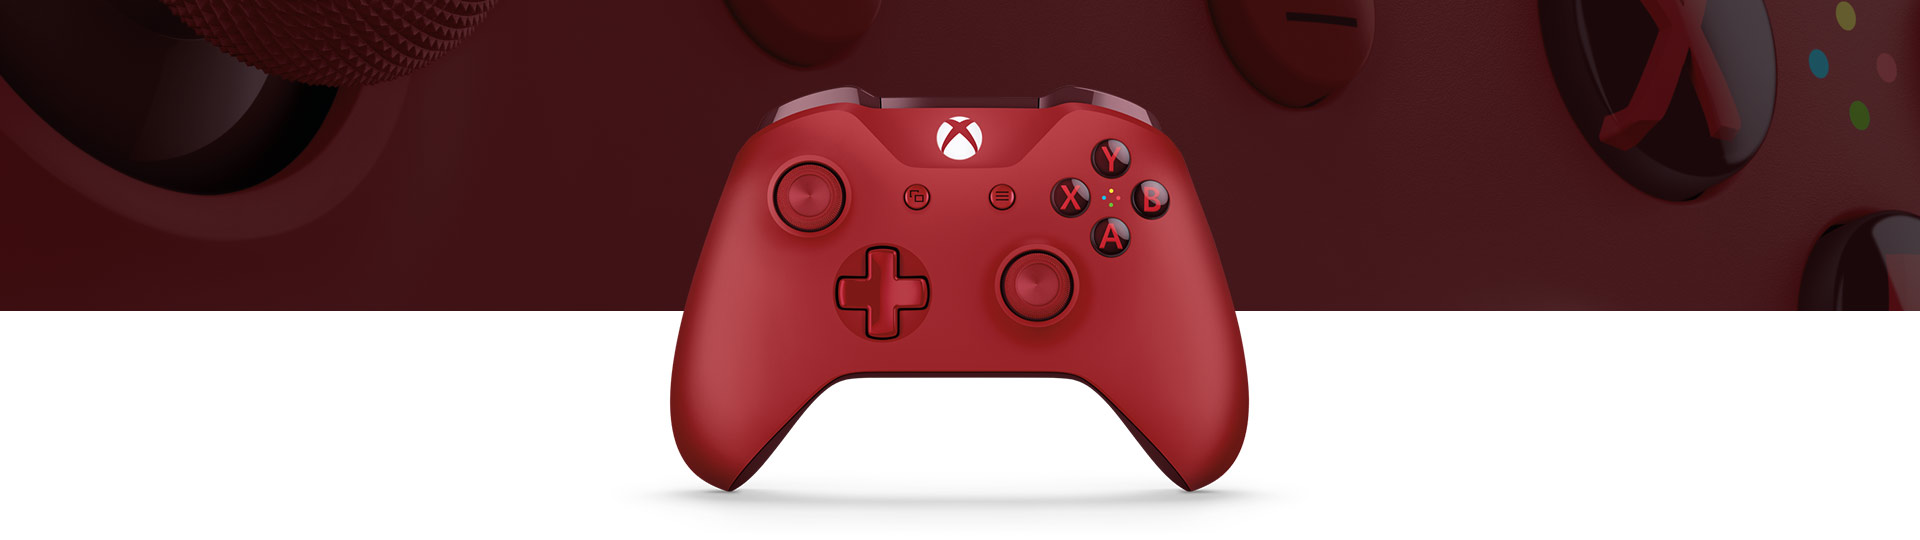 wireless xbox one controller with 3.5 mm jack